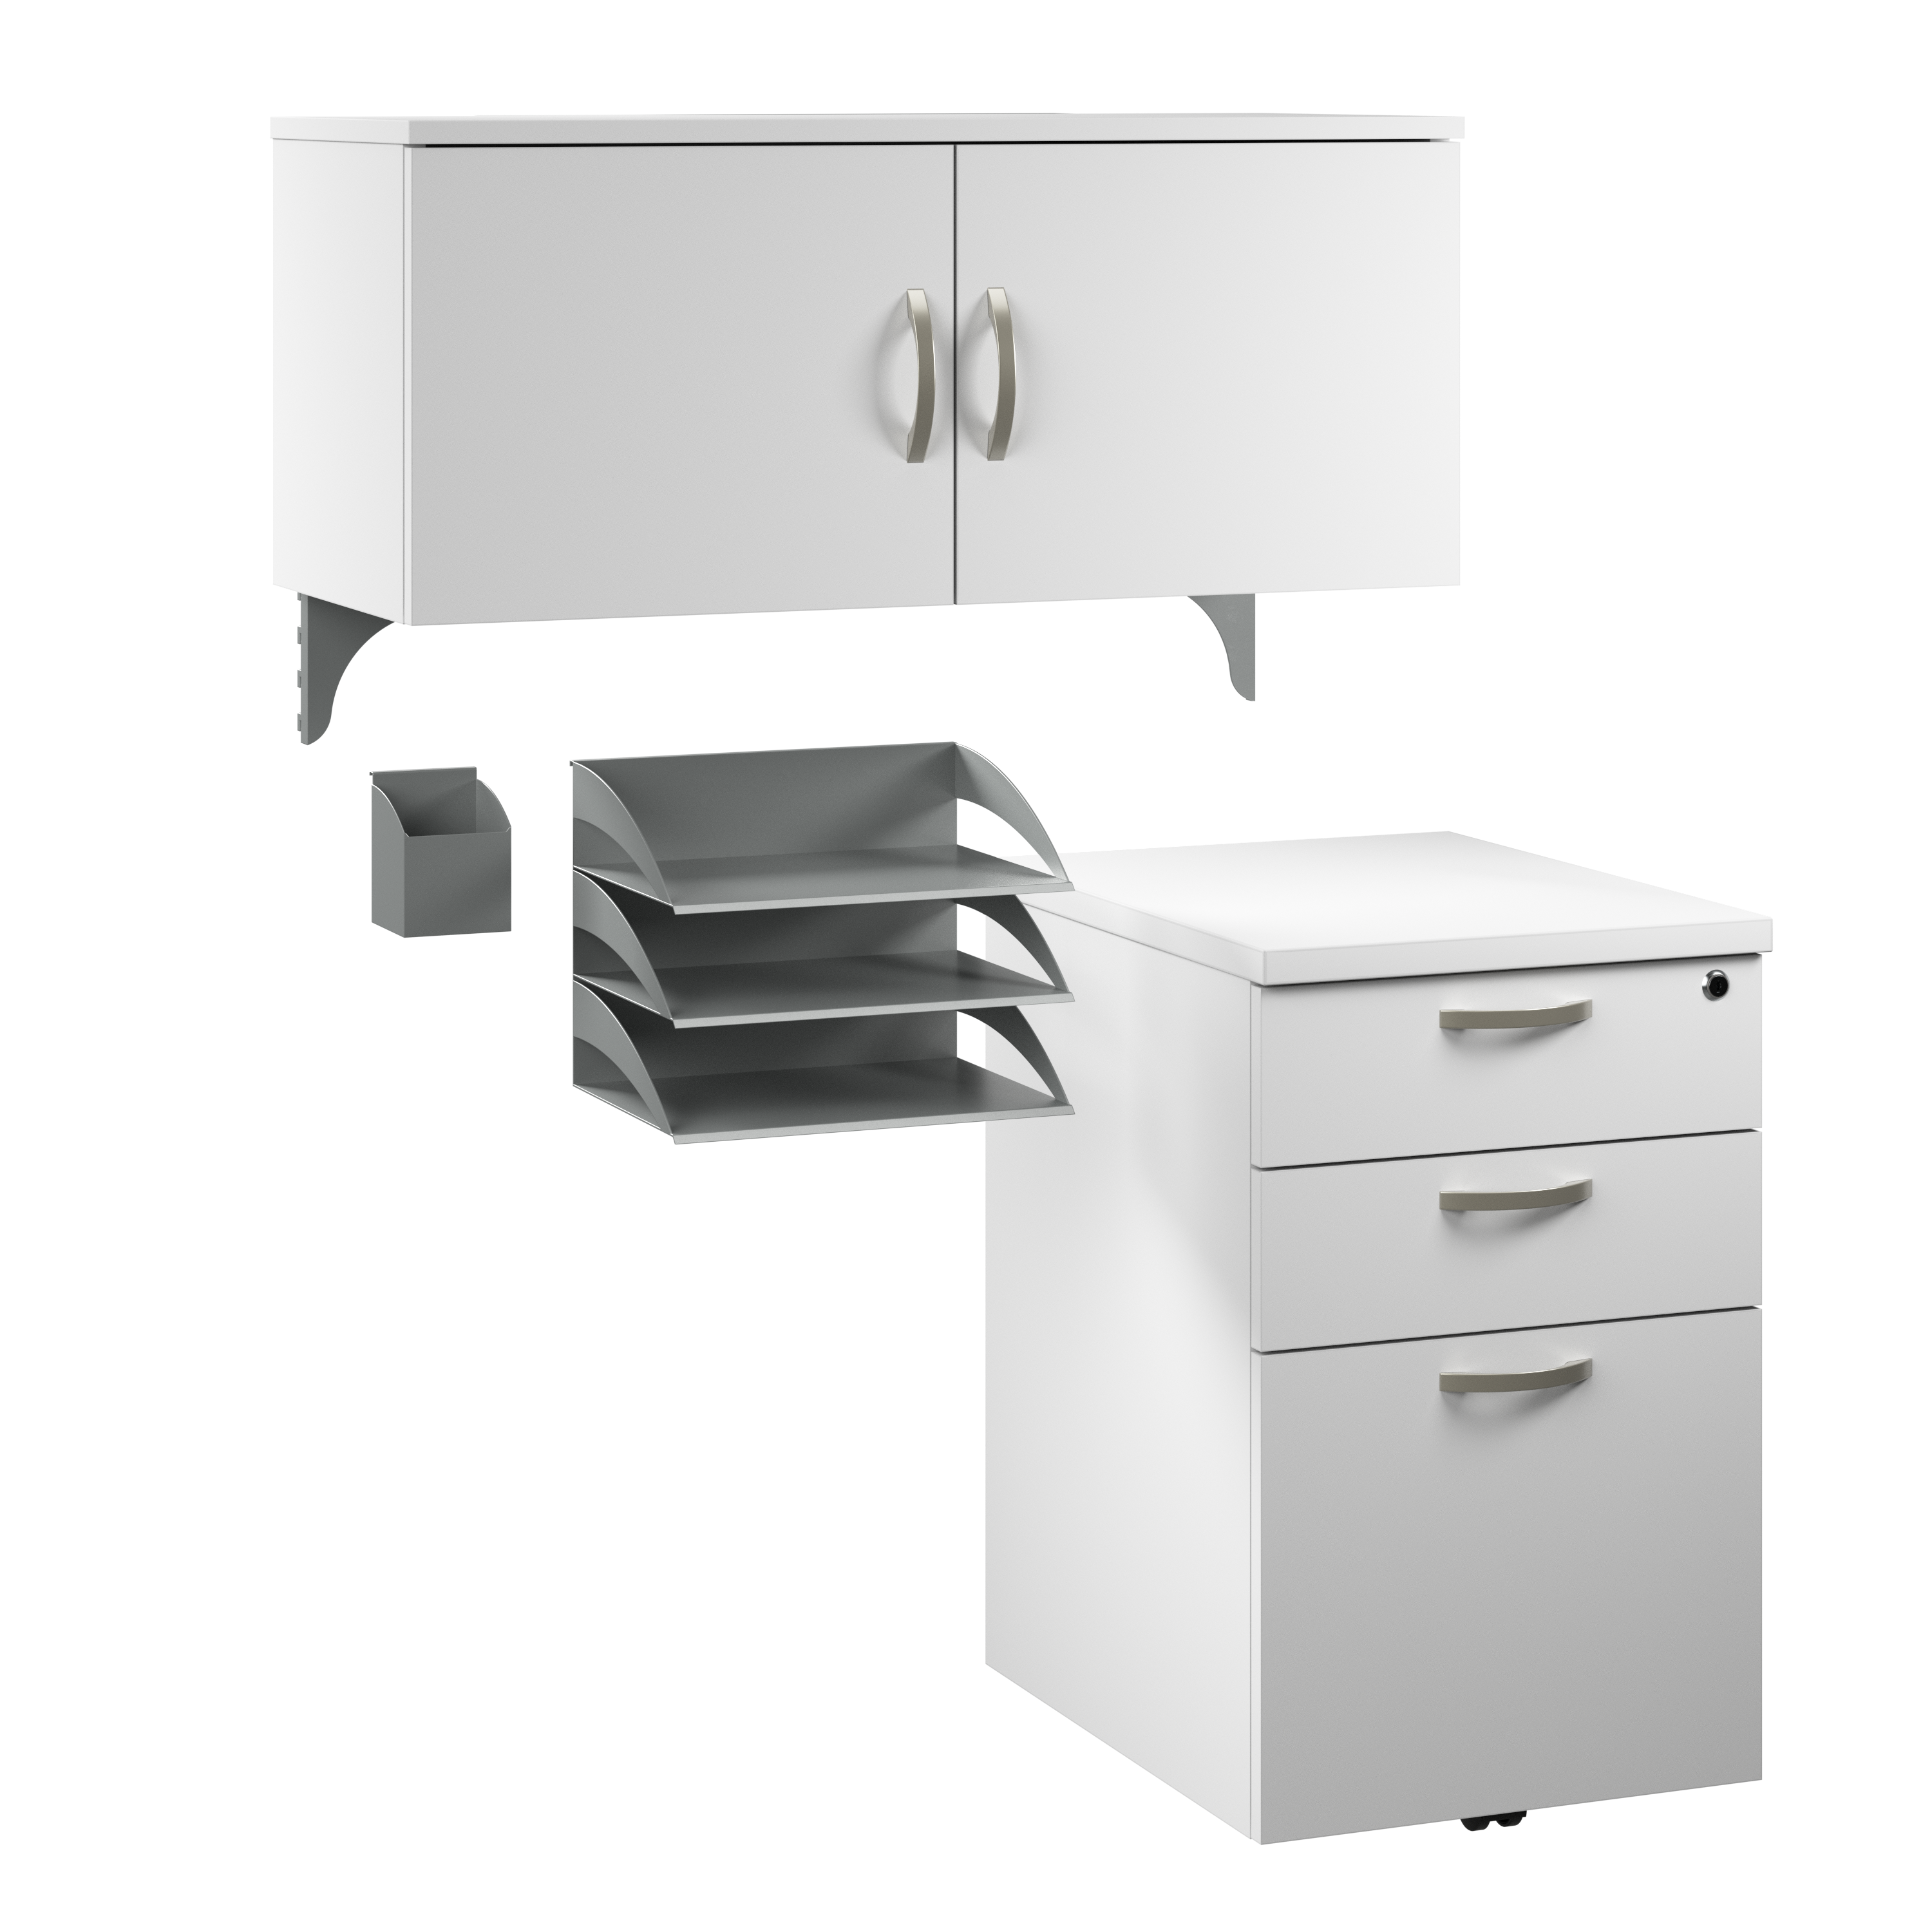 Shop Bush Business Furniture Office in an Hour Cubicle Storage with Cabinet, Drawers, Paper Tray, and Pencil Holder 02 WC36190-03K #color_pure white